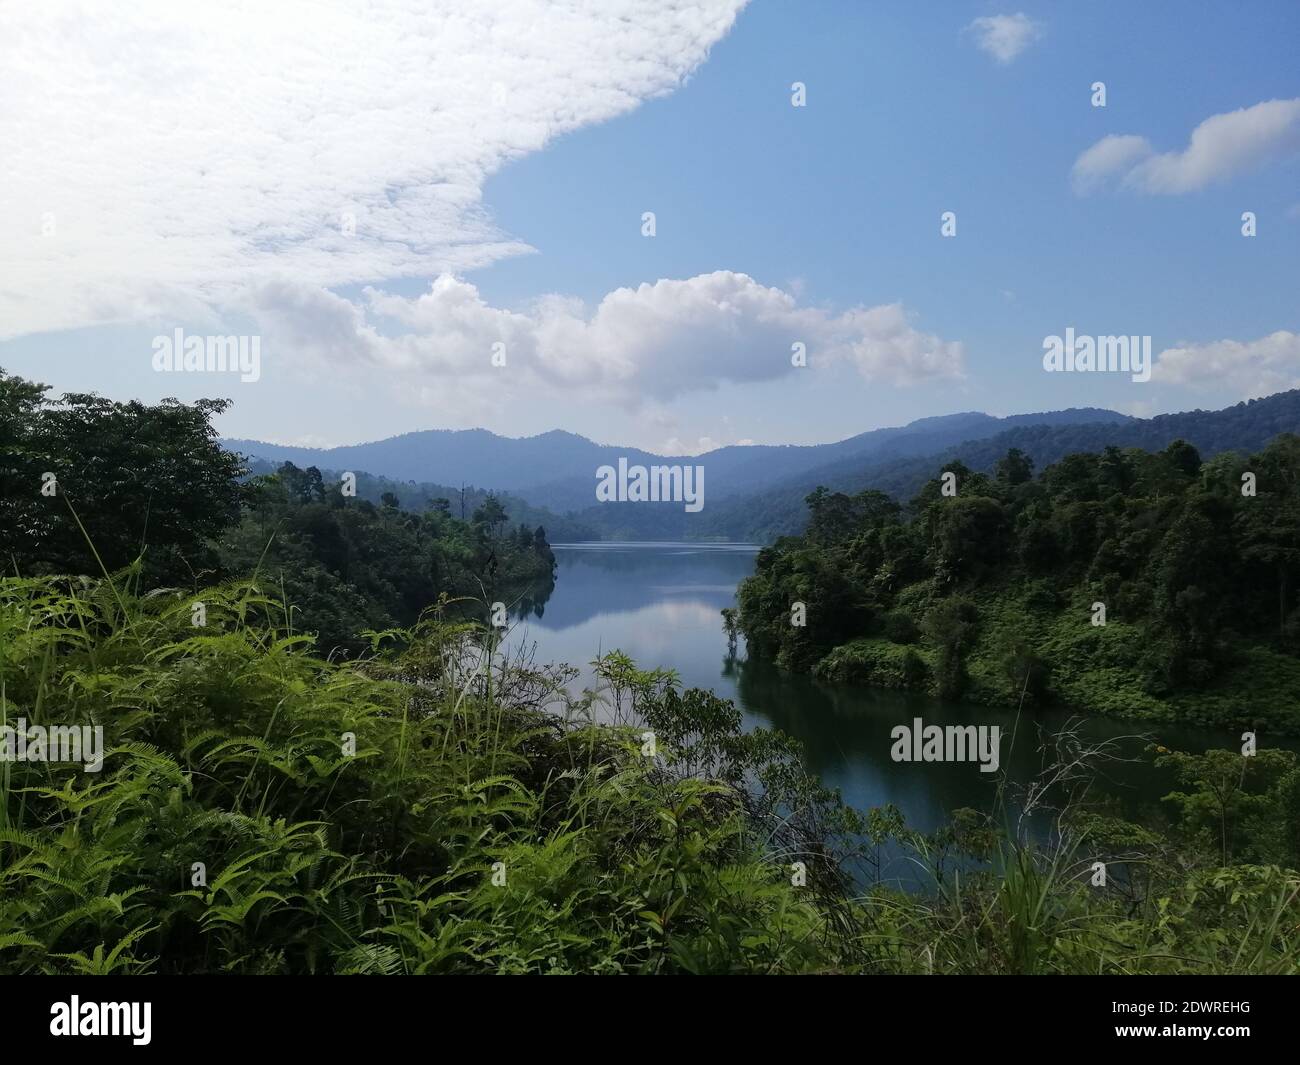 Scenic View Of Lake In Forest Against Sky Stock Photo